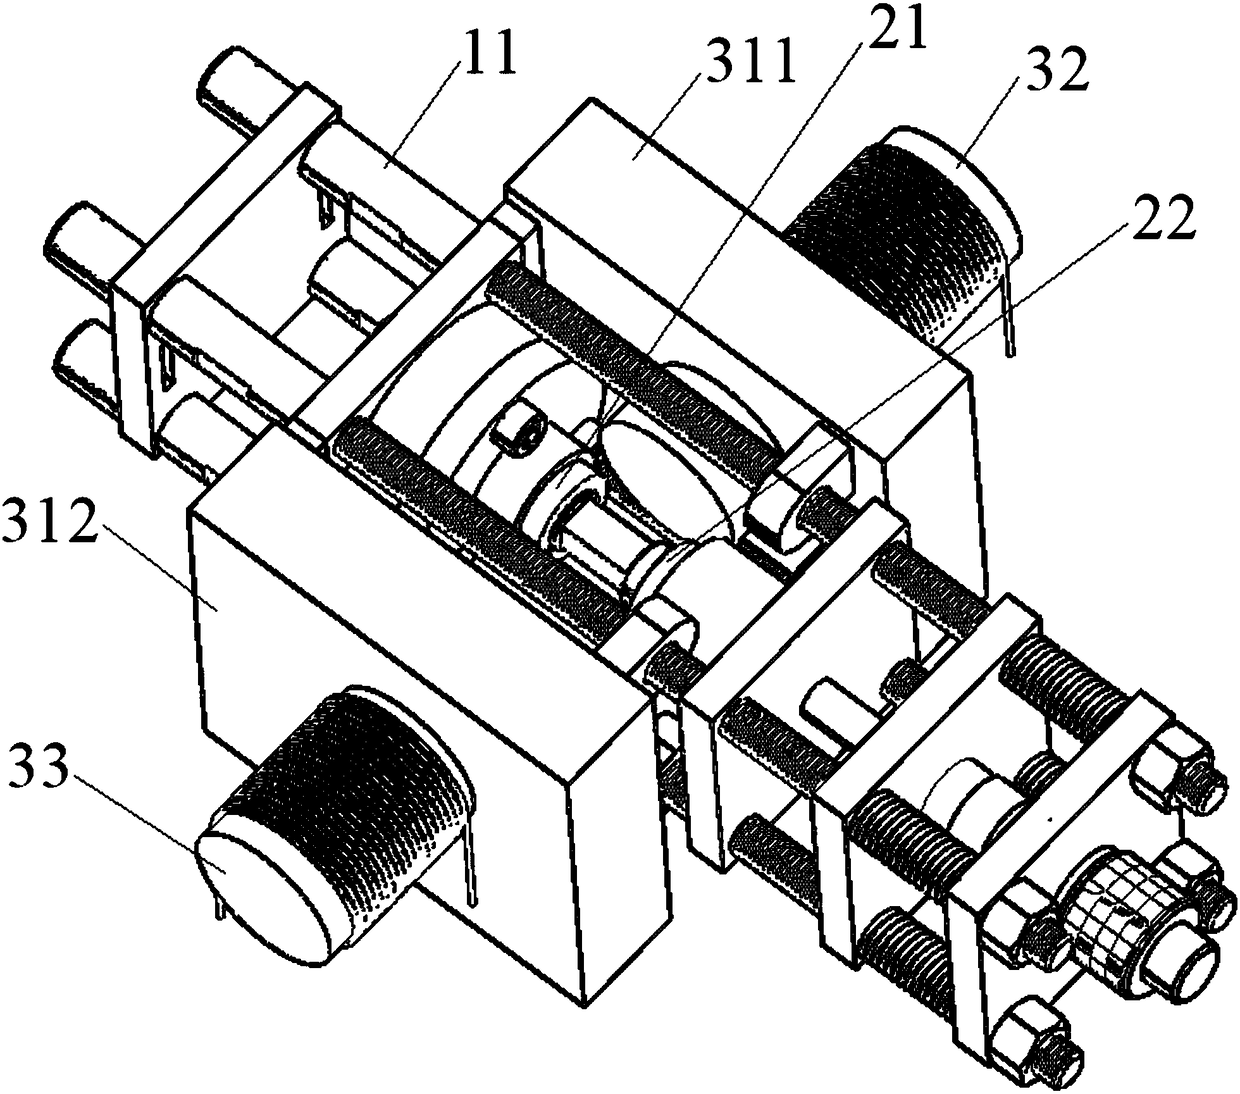 Portable in-situ multi-field coupling loading device for neutron scattering